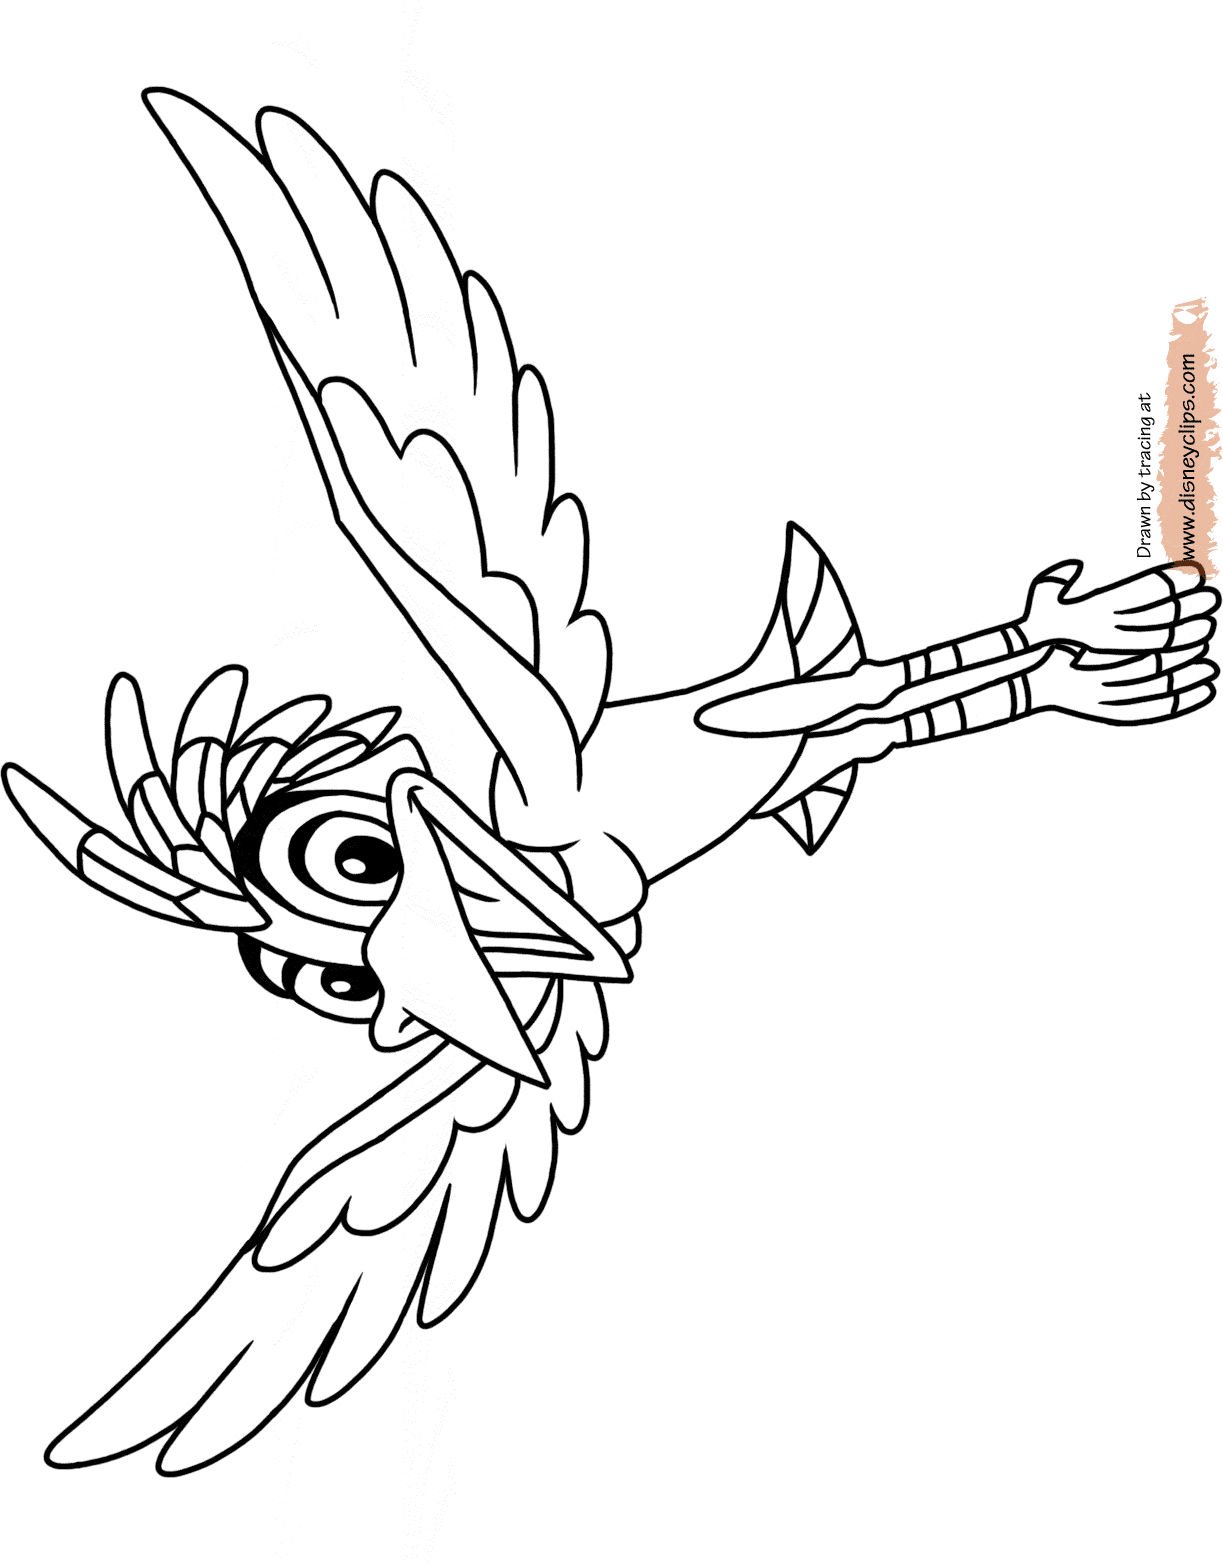 coloring page o